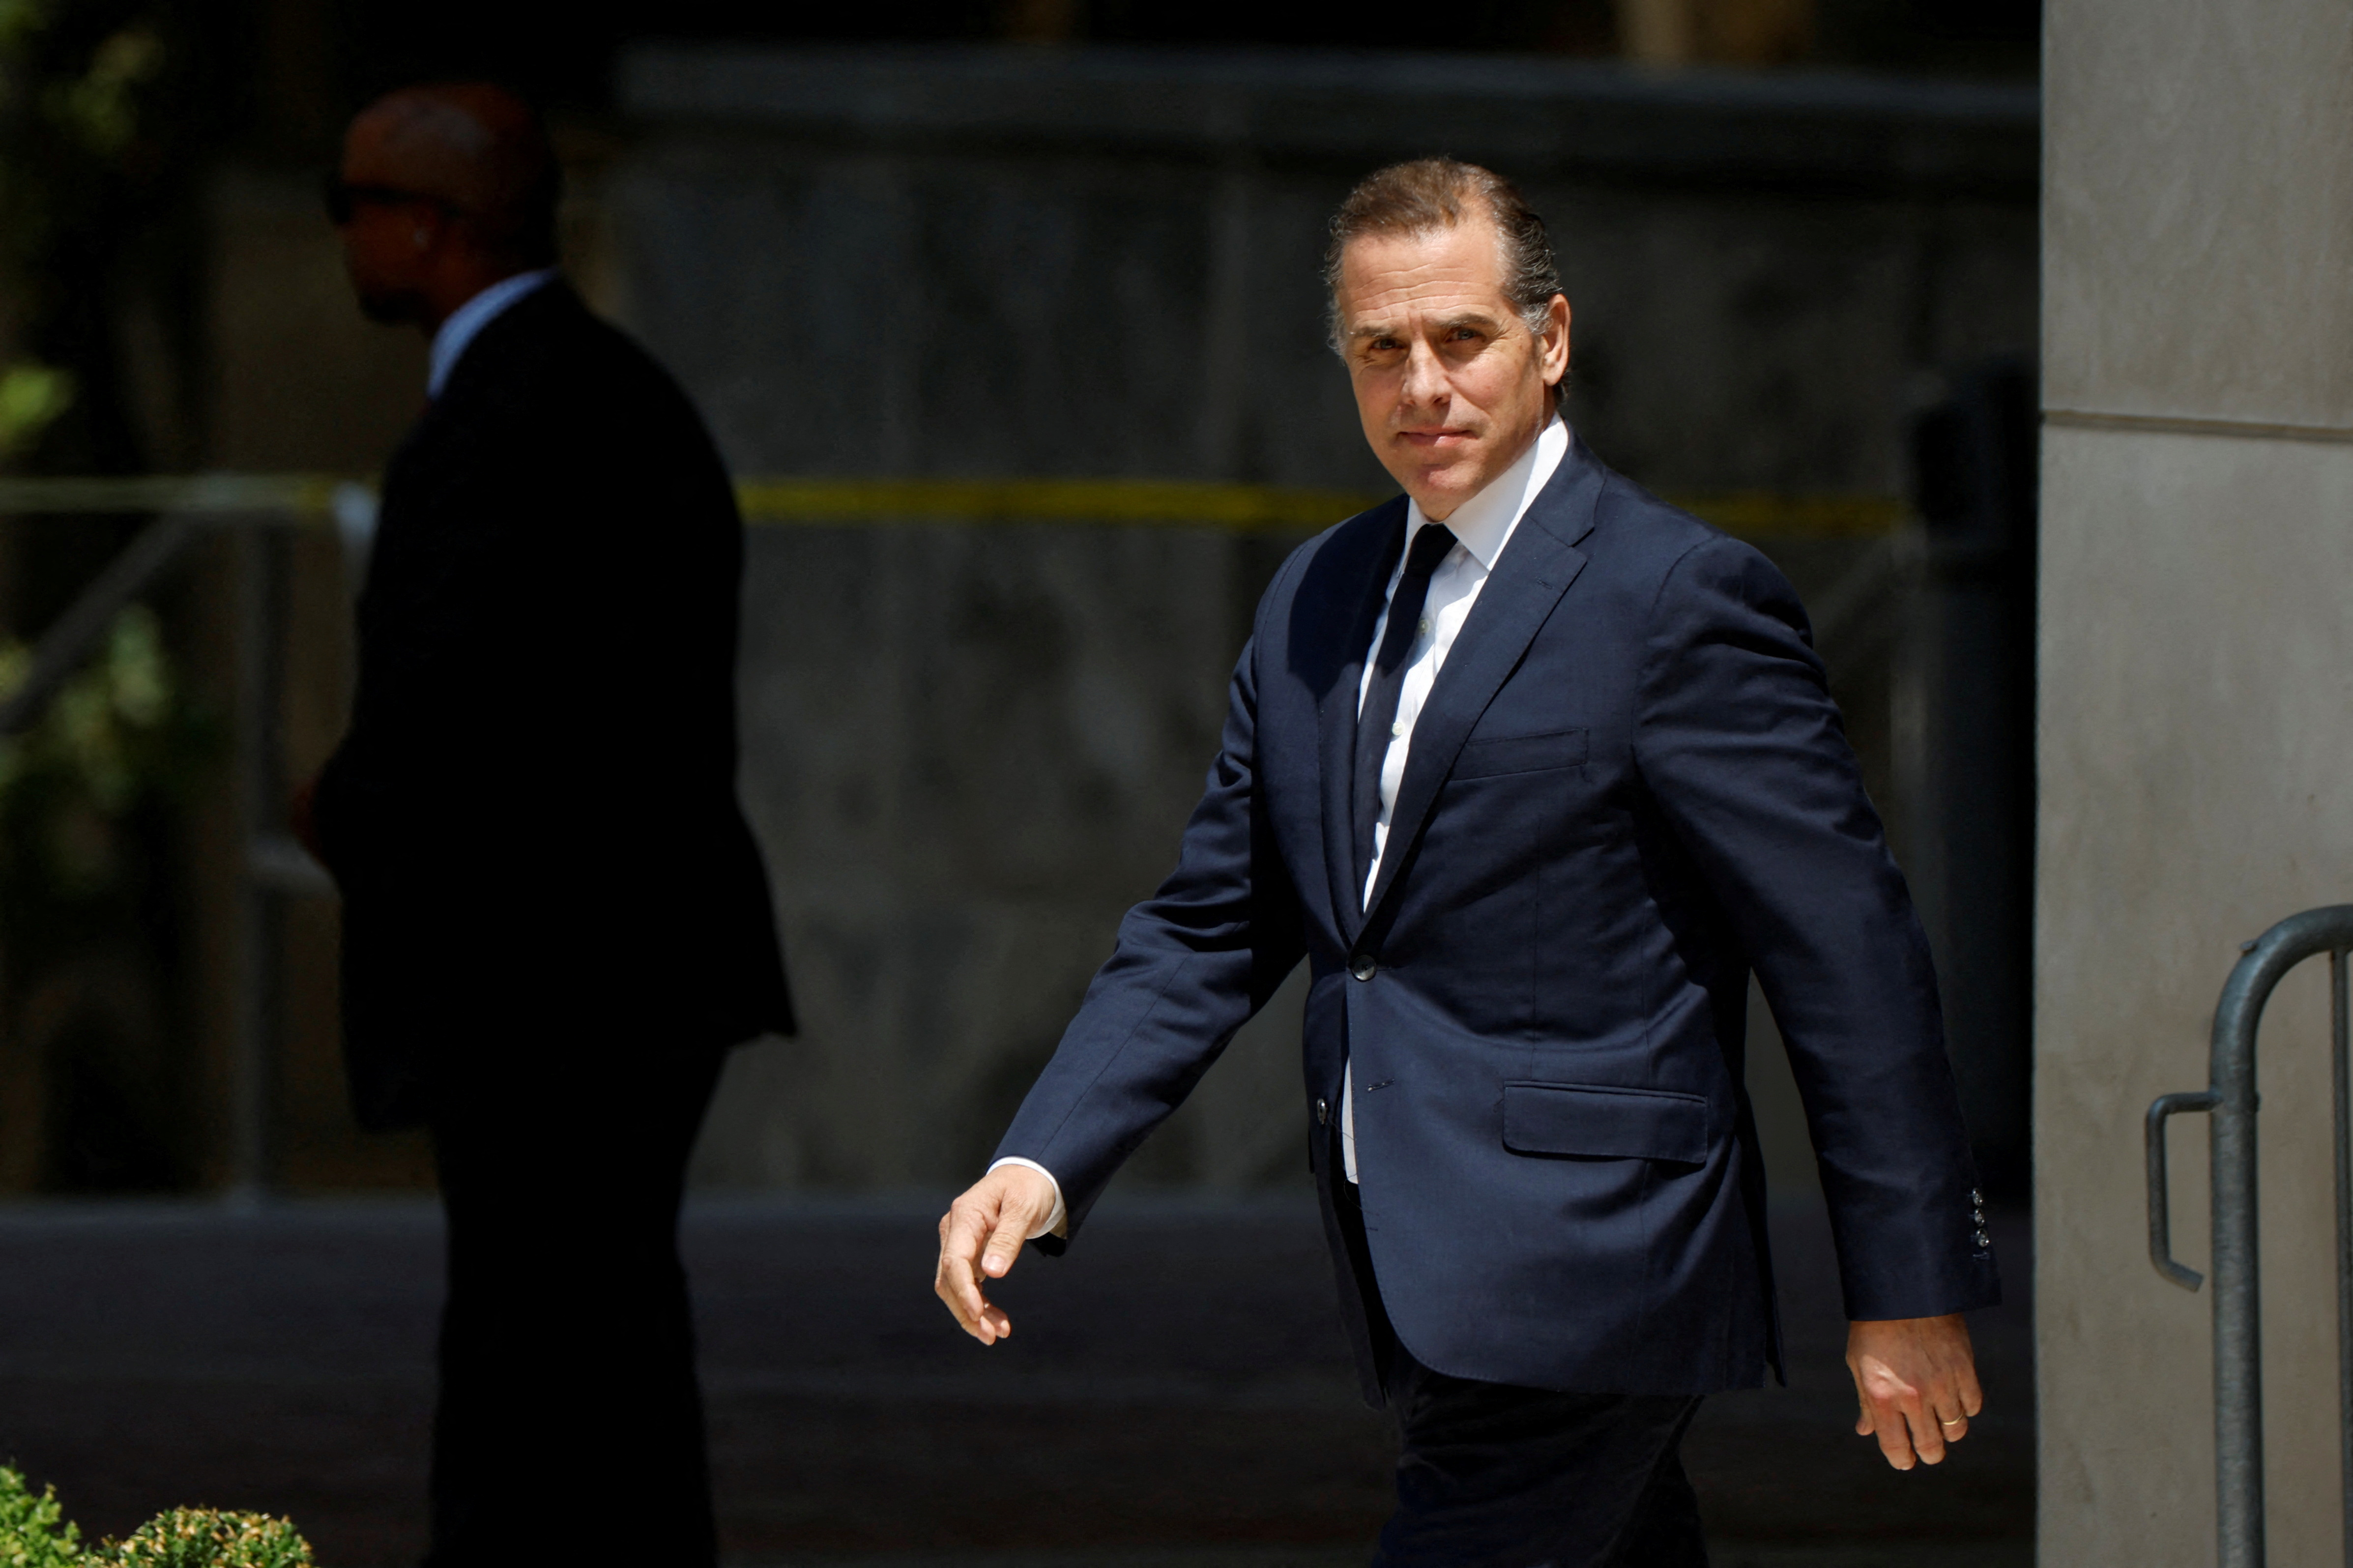 U.S. President Biden's son Hunter to face tax charges in federal court